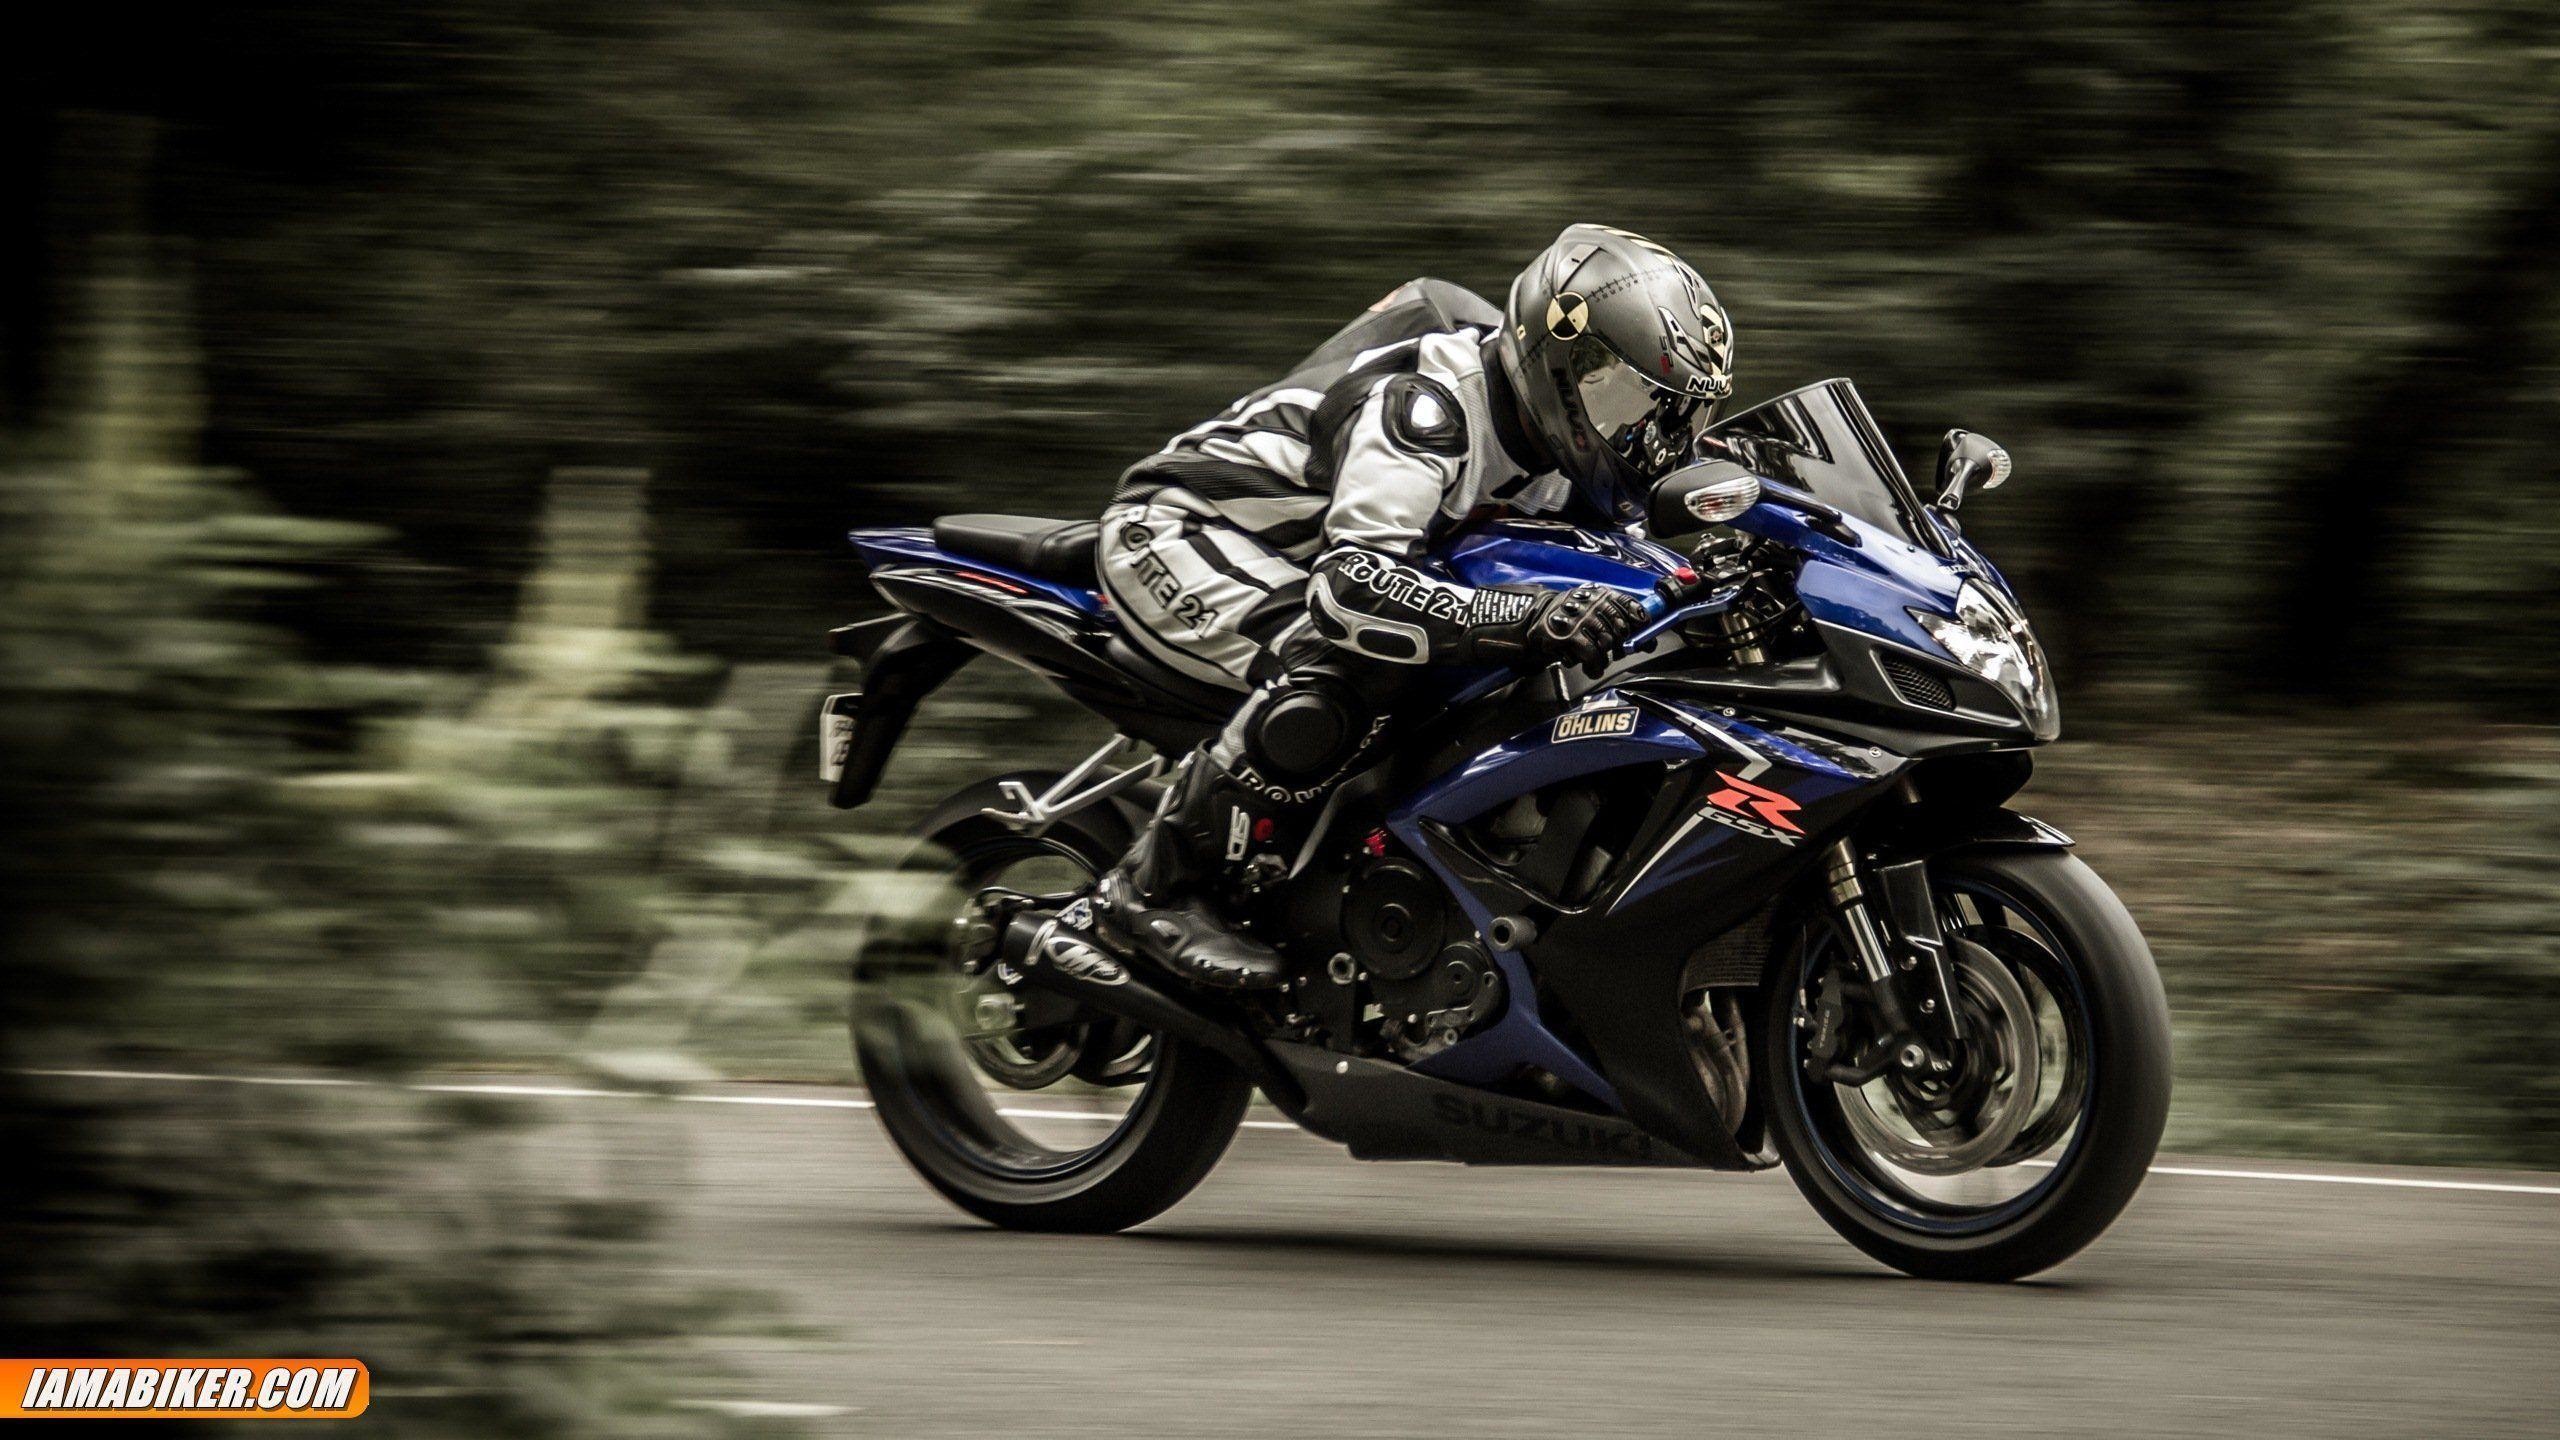 2560x1440 Suzuki Motorcycles GSXR Wallpapers- HD Wallpapers OS